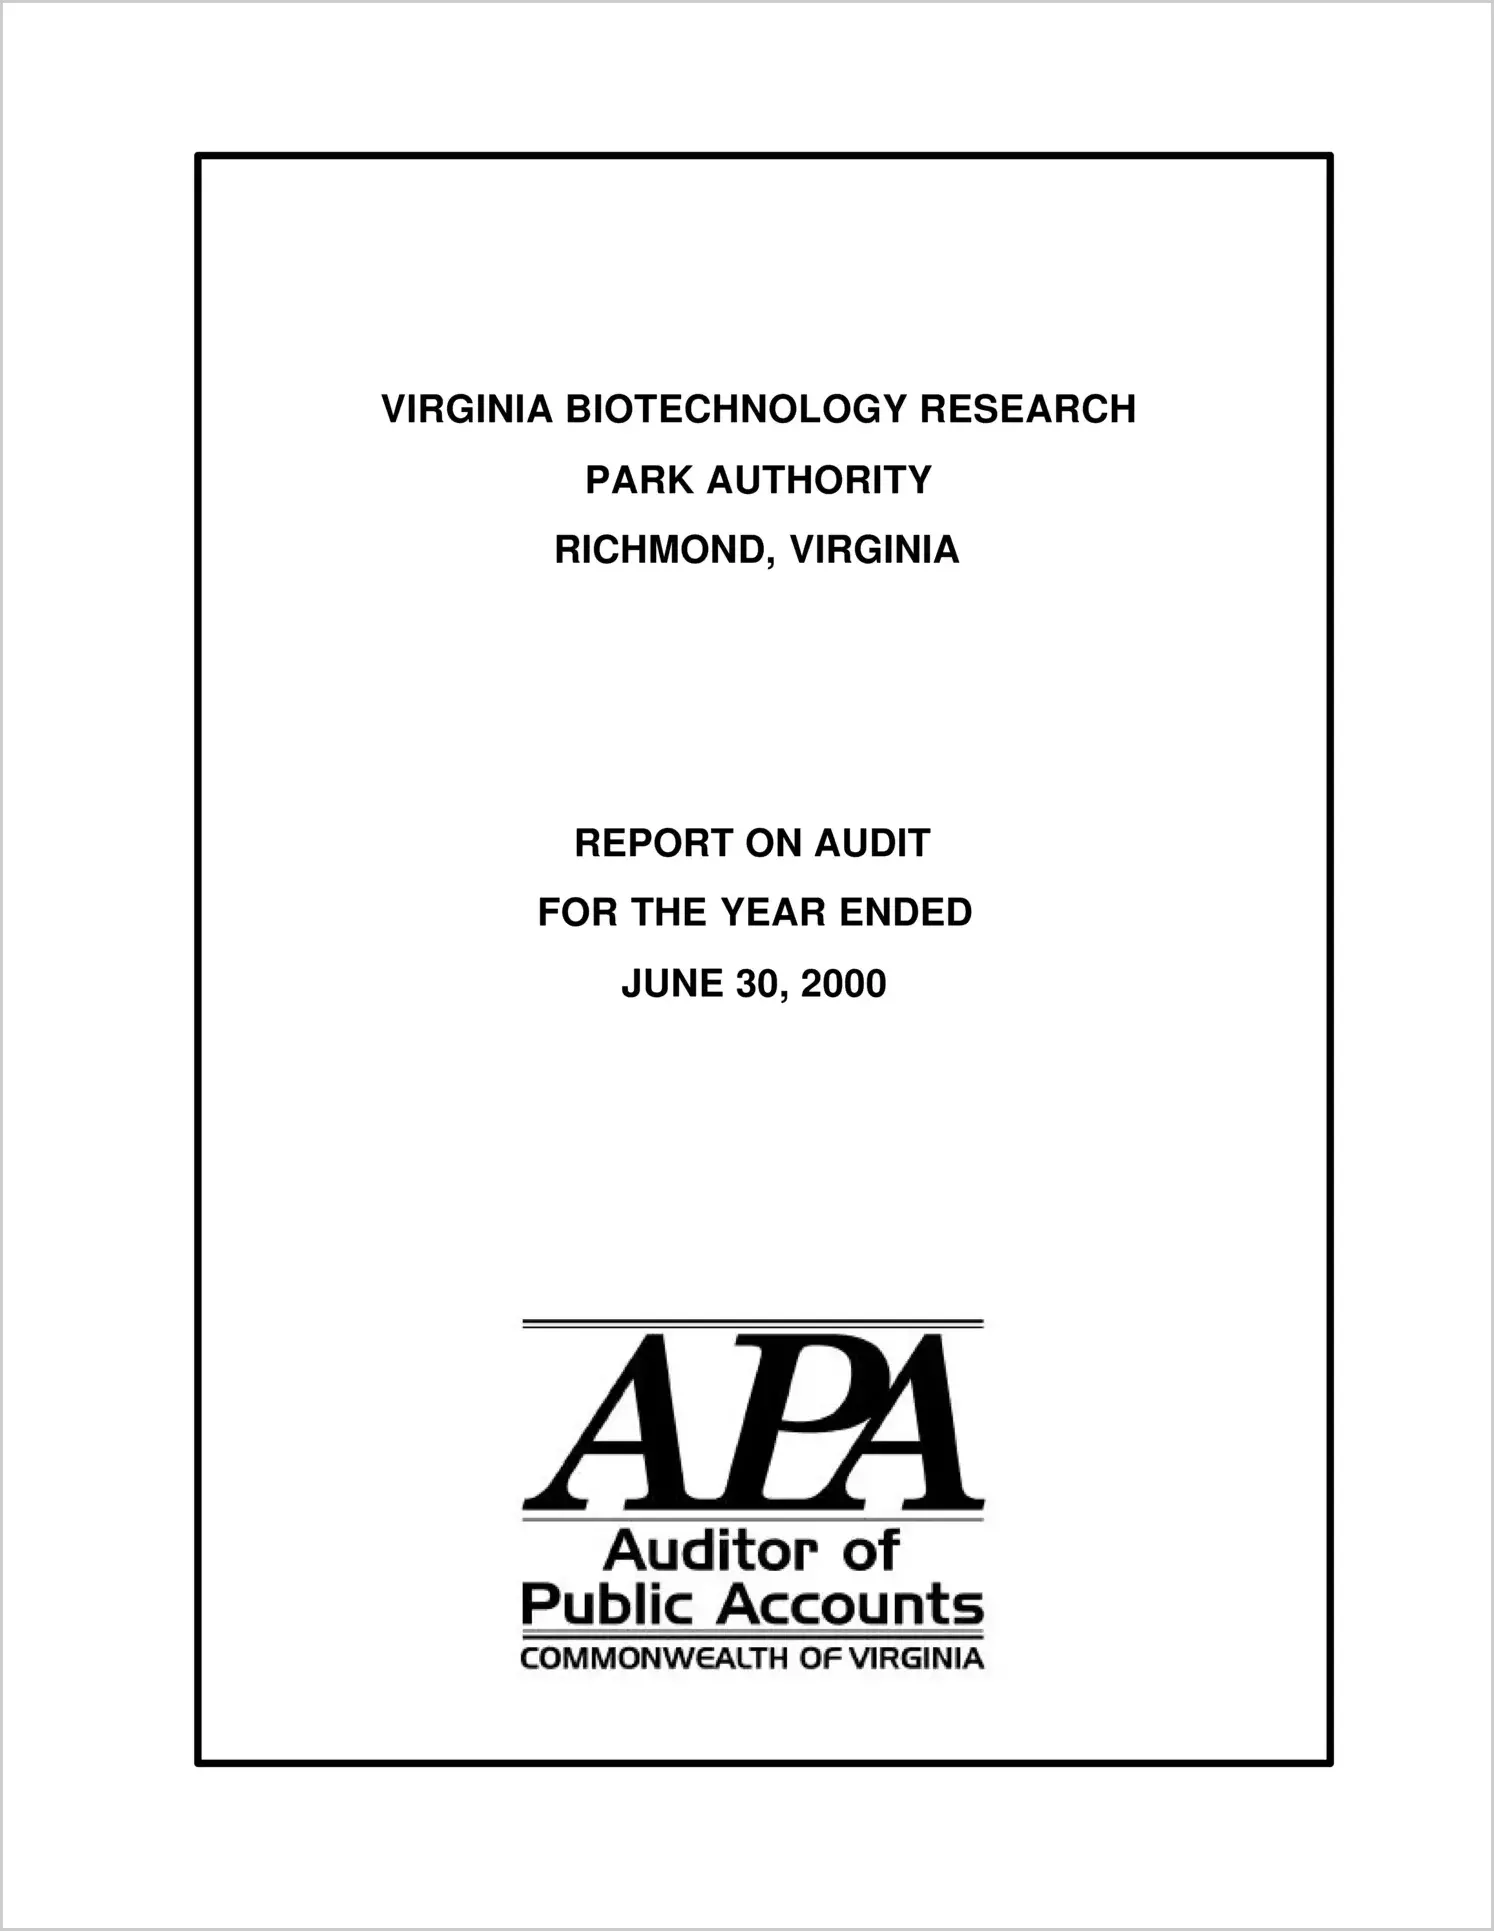 Virginia Biotechnology Research Park Authority for the year ended June 30, 2000